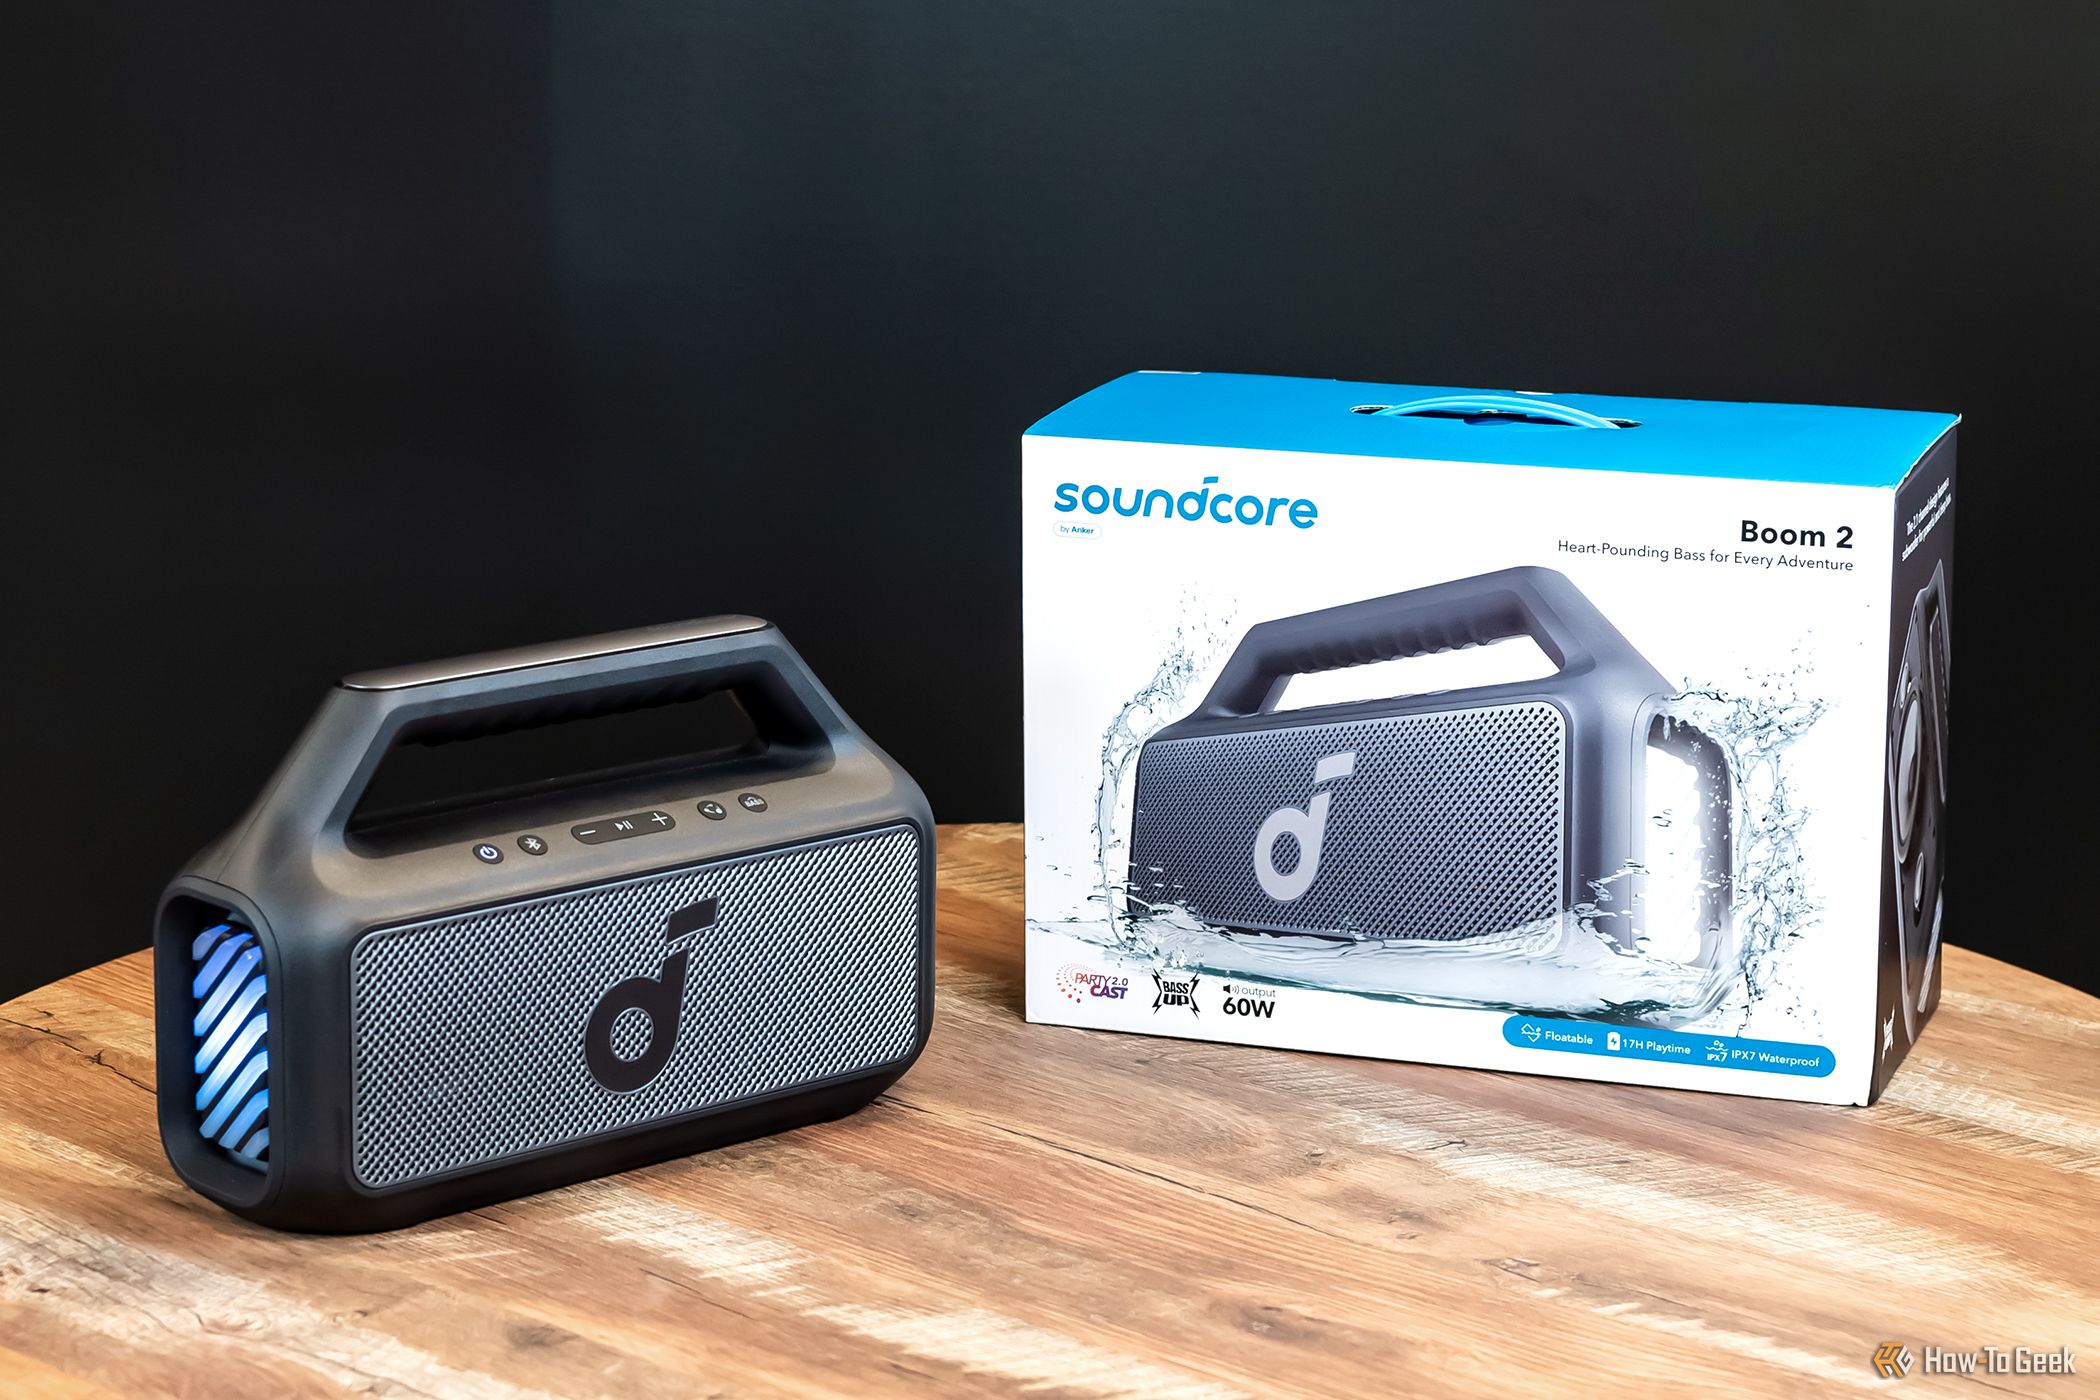 The Soundcore Boom 2 with its box.